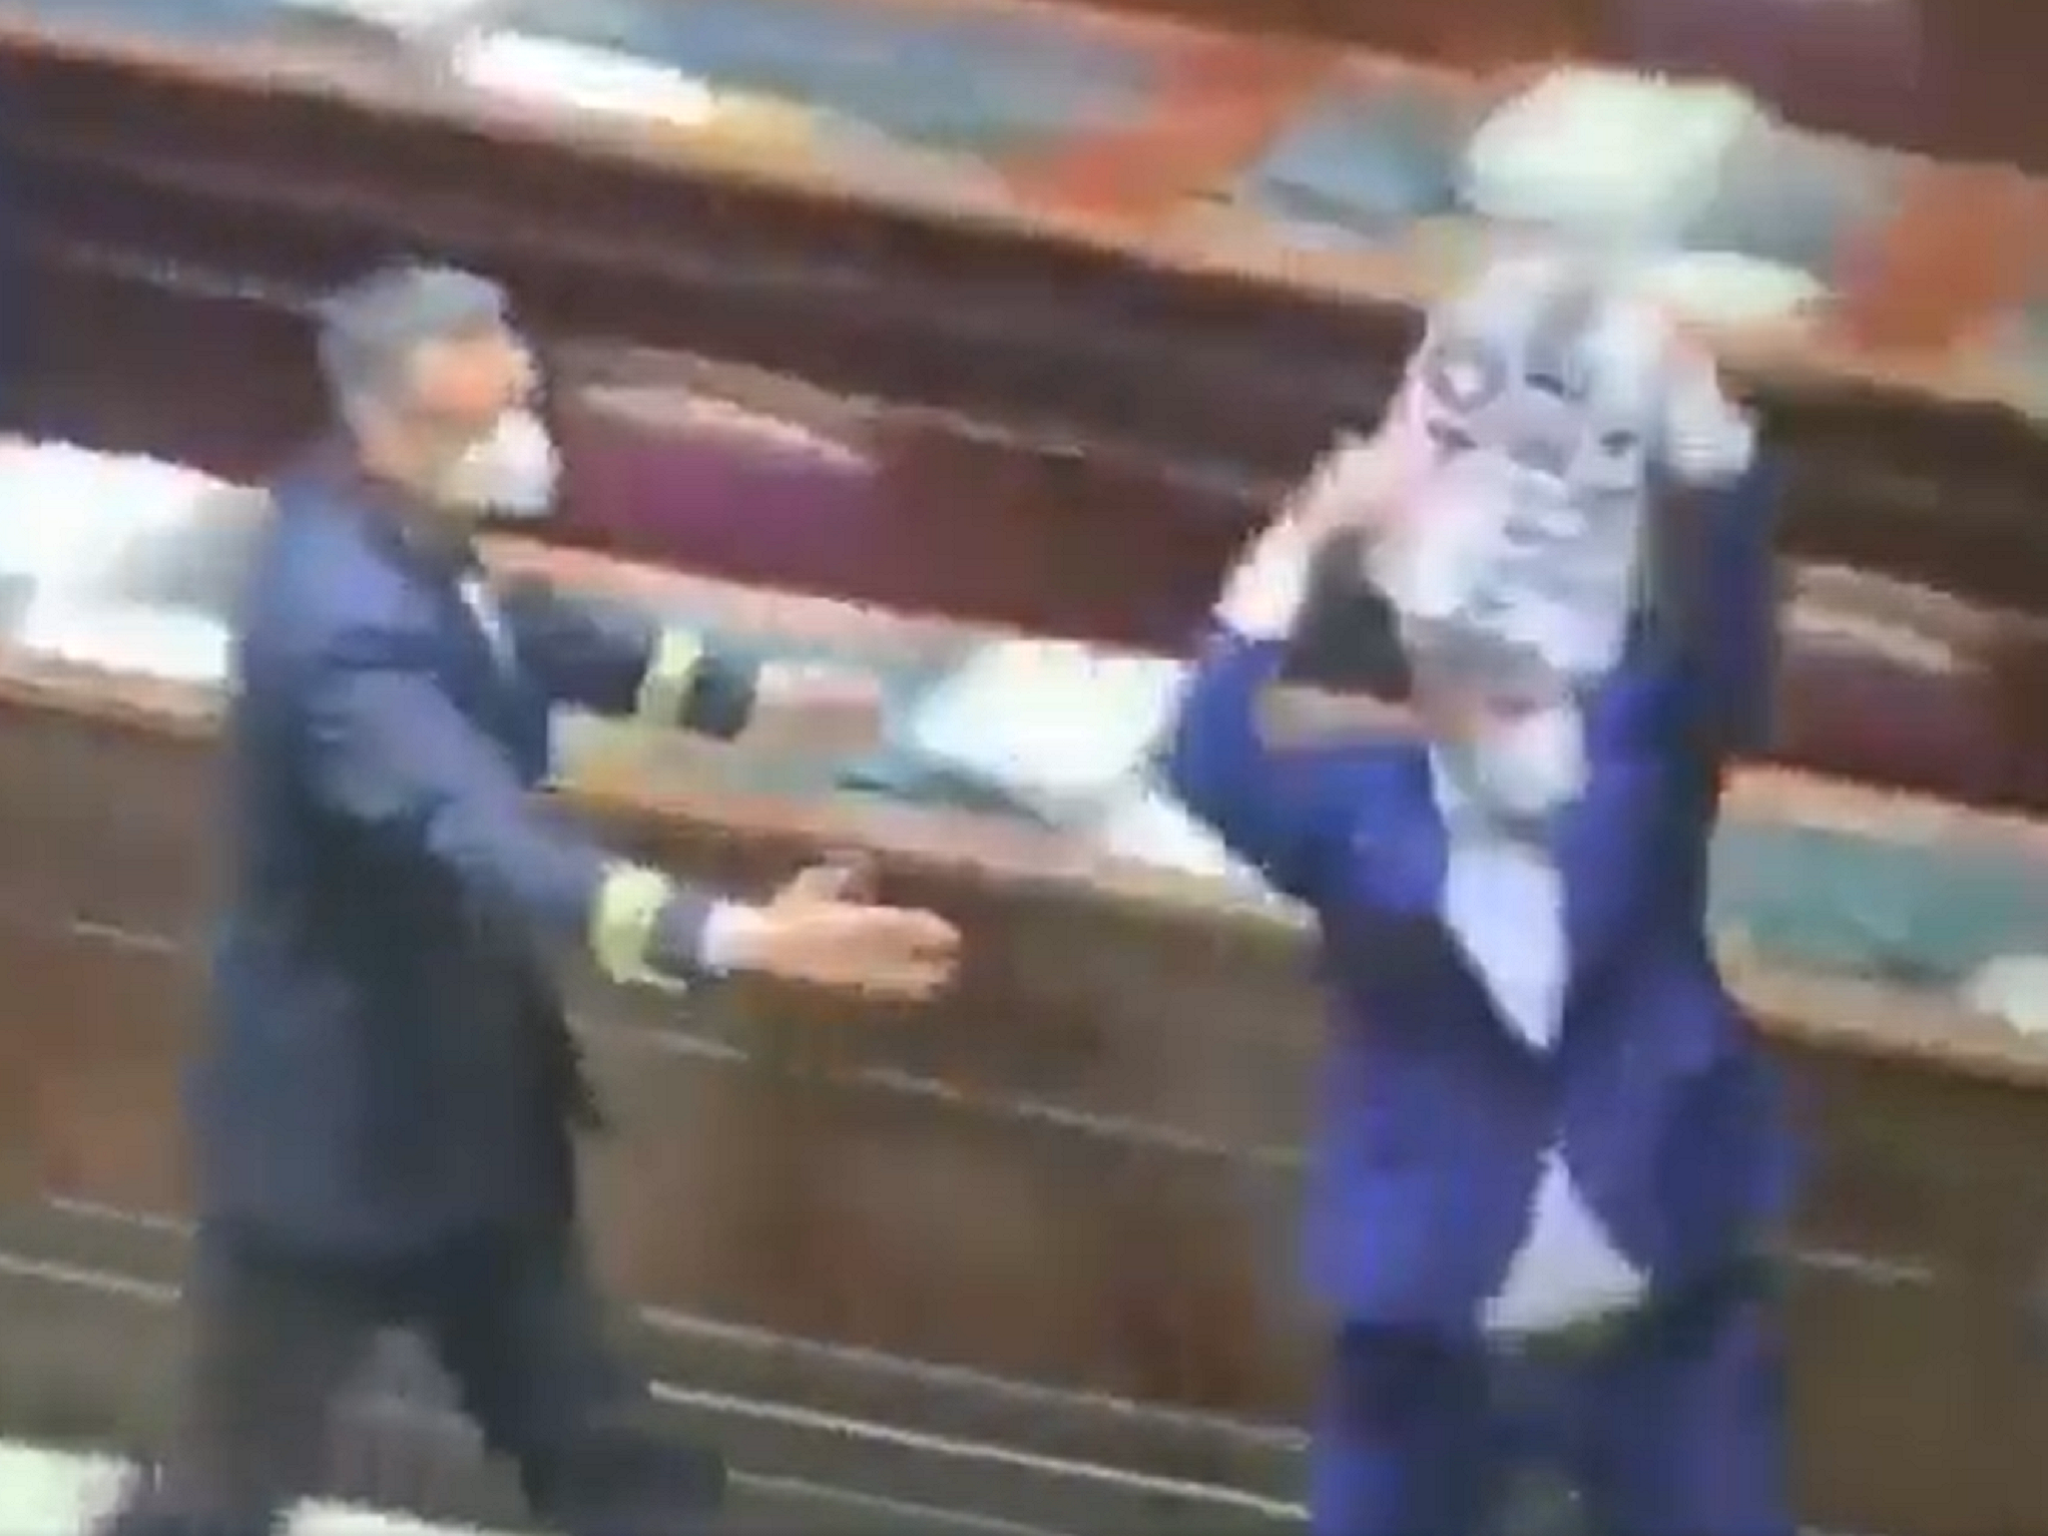 An Italian MP holding a “no green pass” sign was chased out of parliament by security during a protest against Italy’s vaccine passport scheme